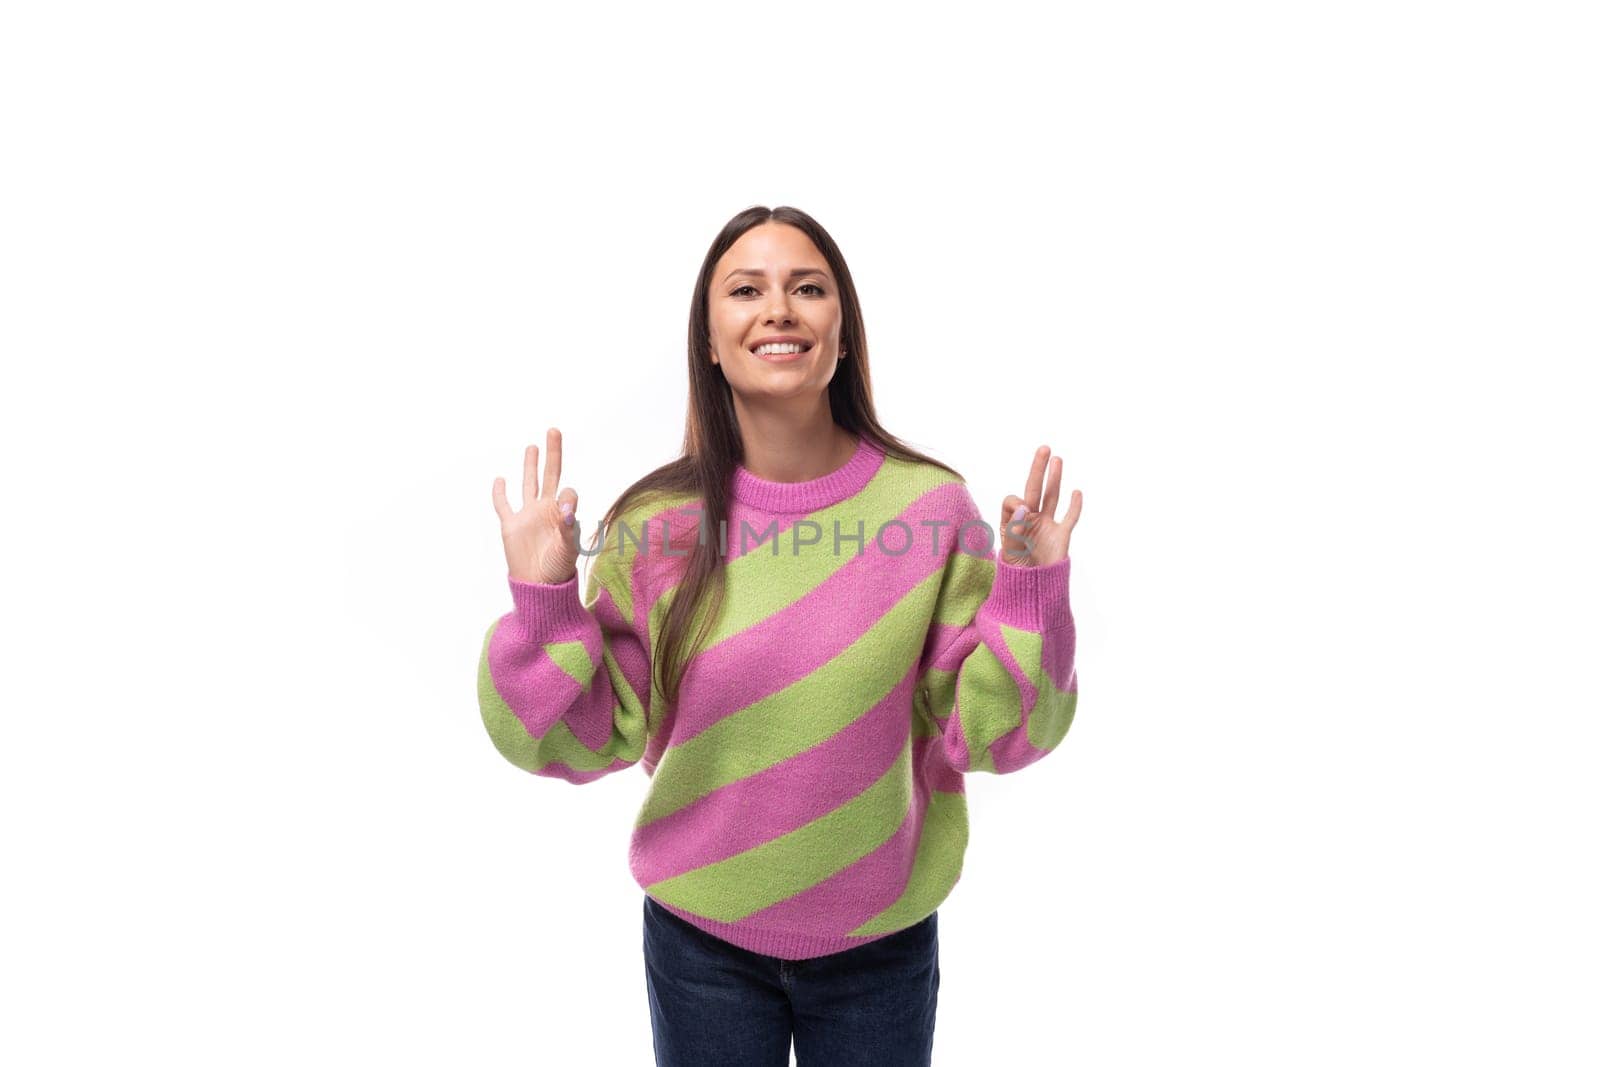 portrait of a well-groomed 35 year old feminine model woman dressed in a pink stylish pullover on a white background with copy space.